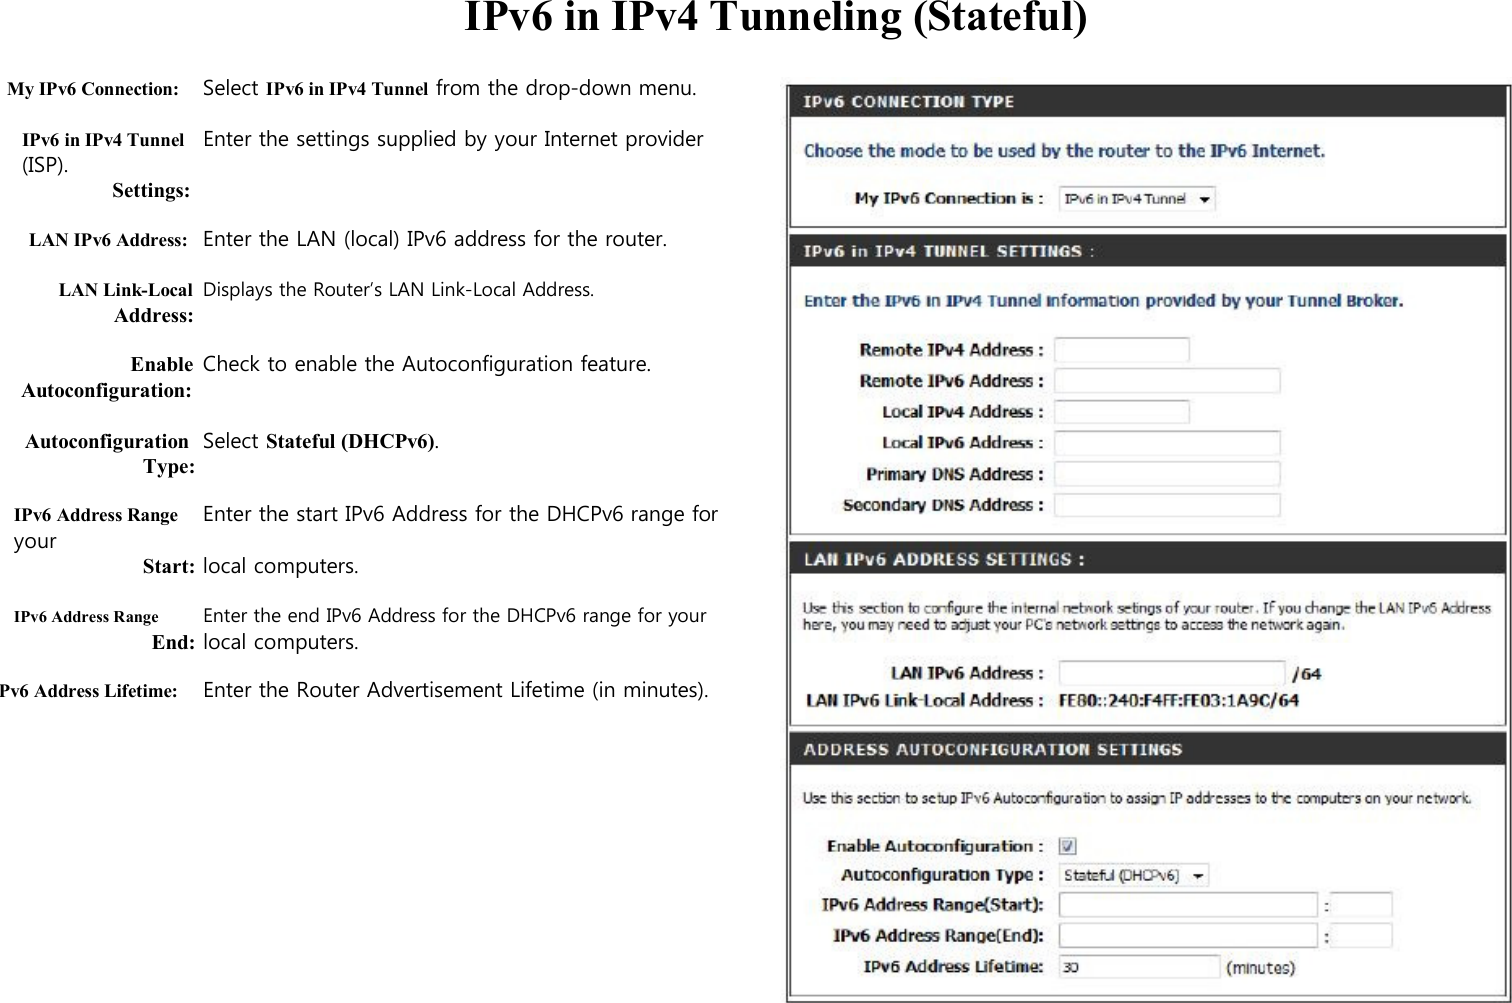  IPv6 in IPv4 Tunneling (Stateful)  My IPv6 Connection: Select IPv6 in IPv4 Tunnel from the drop-down menu.  IPv6 in IPv4 Tunnel Enter the settings supplied by your Internet provider (ISP). Settings:  LAN IPv6 Address: Enter the LAN (local) IPv6 address for the router.  LAN Link-Local Displays the Router’s LAN Link-Local Address. Address:  Enable Check to enable the Autoconfiguration feature. Autoconfiguration:  Autoconfiguration Select Stateful (DHCPv6). Type:  IPv6 Address Range Enter the start IPv6 Address for the DHCPv6 range for your   Start: local computers.  IPv6 Address Range Enter the end IPv6 Address for the DHCPv6 range for your End: local computers.  Pv6 Address Lifetime: Enter the Router Advertisement Lifetime (in minutes).                     